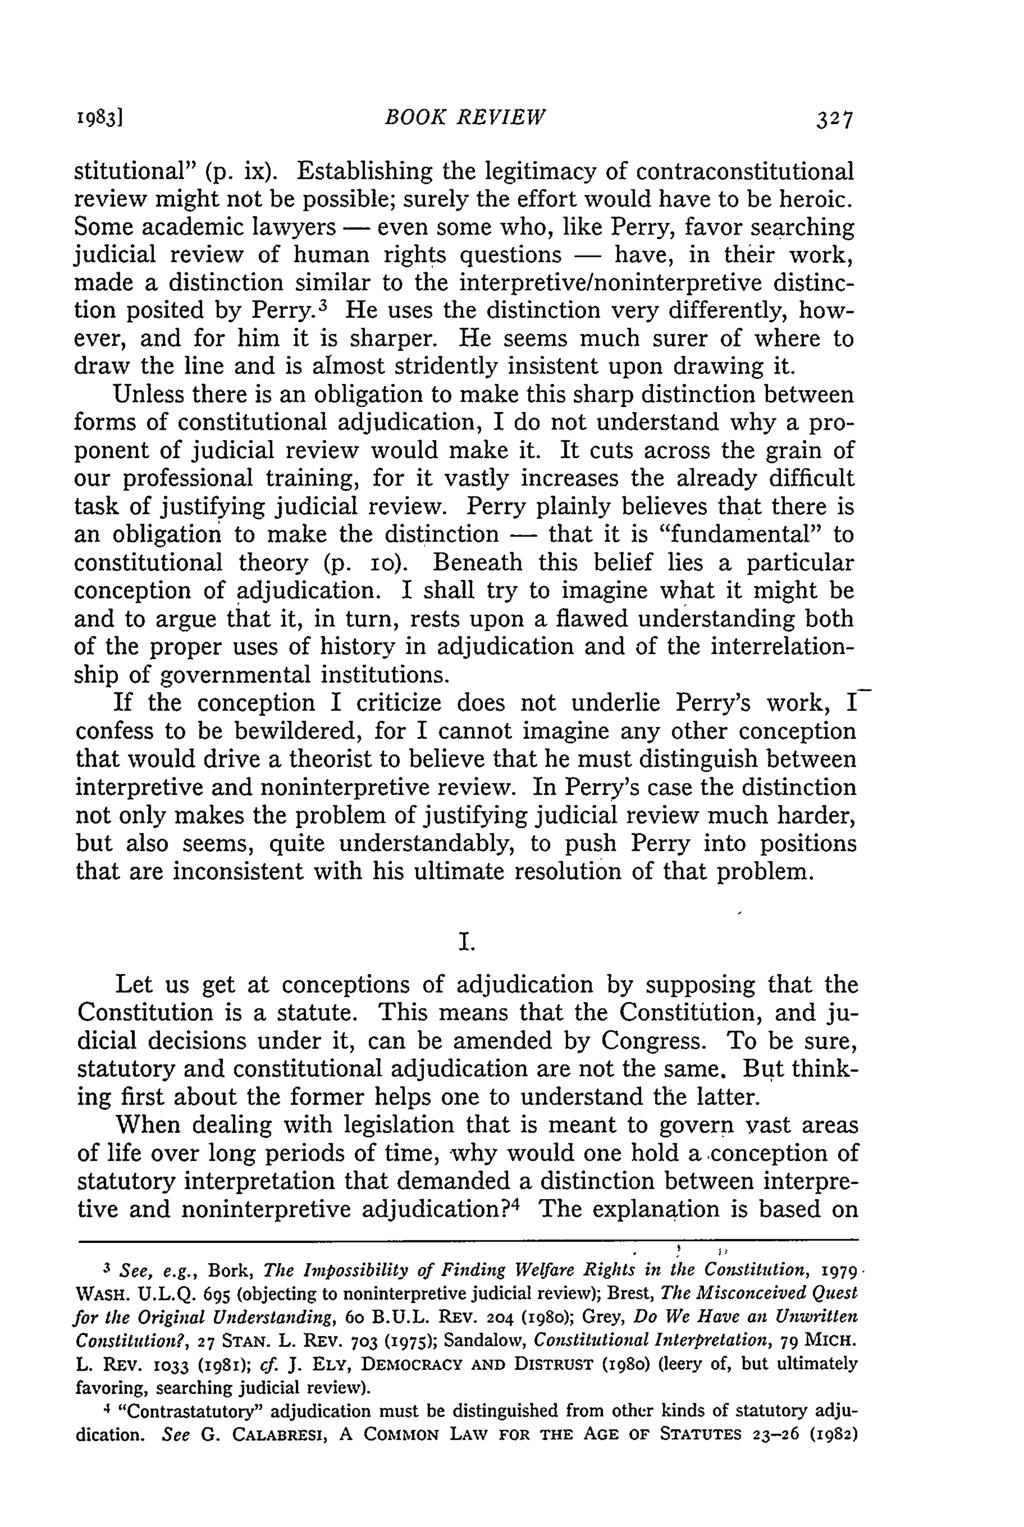 19831 BOOK REVIEW stitutional" (p. ix). Establishing the legitimacy of contraconstitutional review might not be possible; surely the effort would have to be heroic.